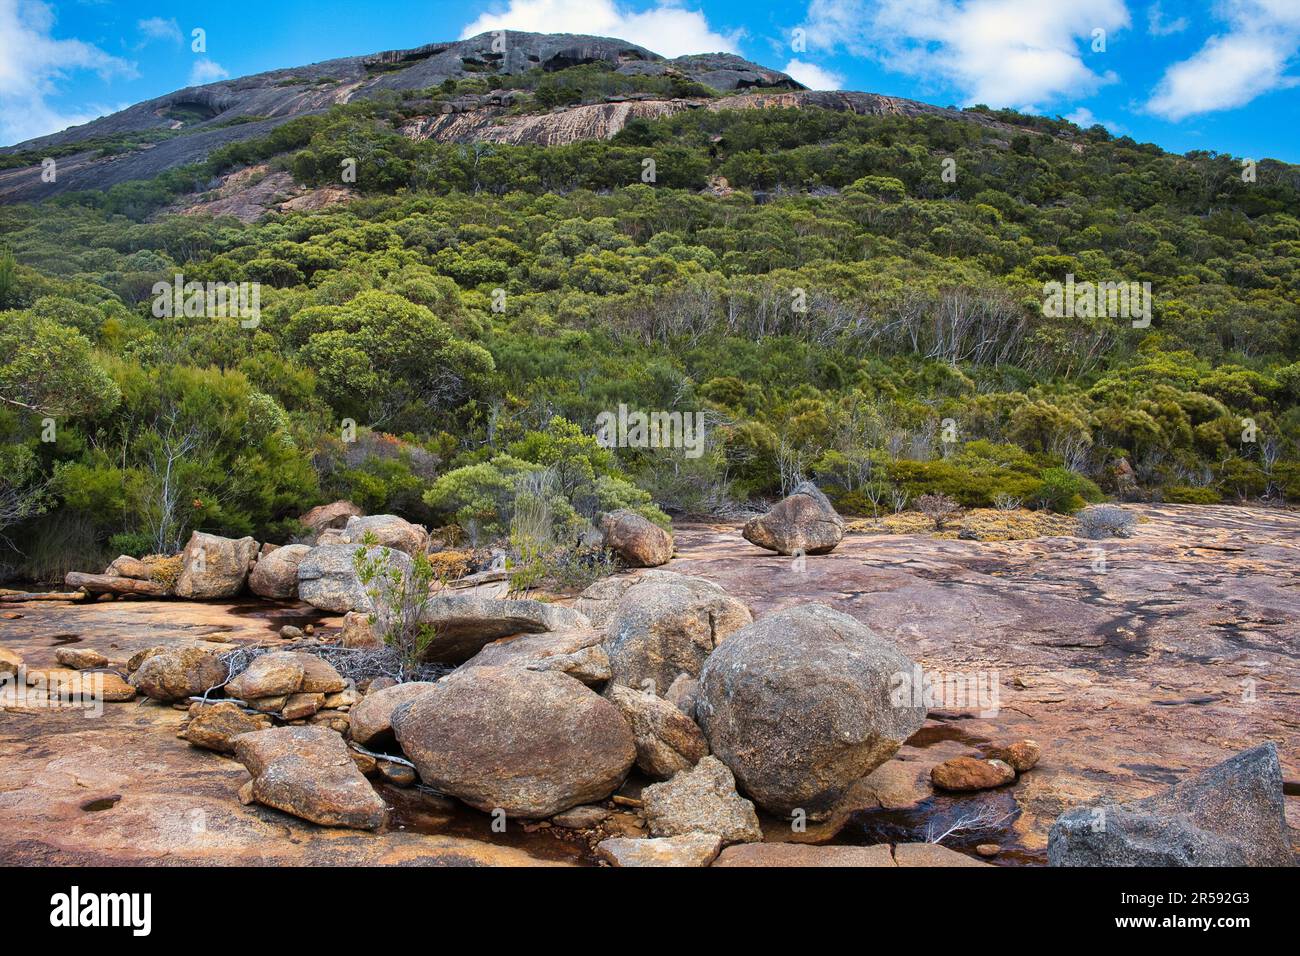 Eroded granitic mountain with coastal vegetation and granite boulders, along the Coastal Track in Cape Le Grand National Park, Western Australia Stock Photo